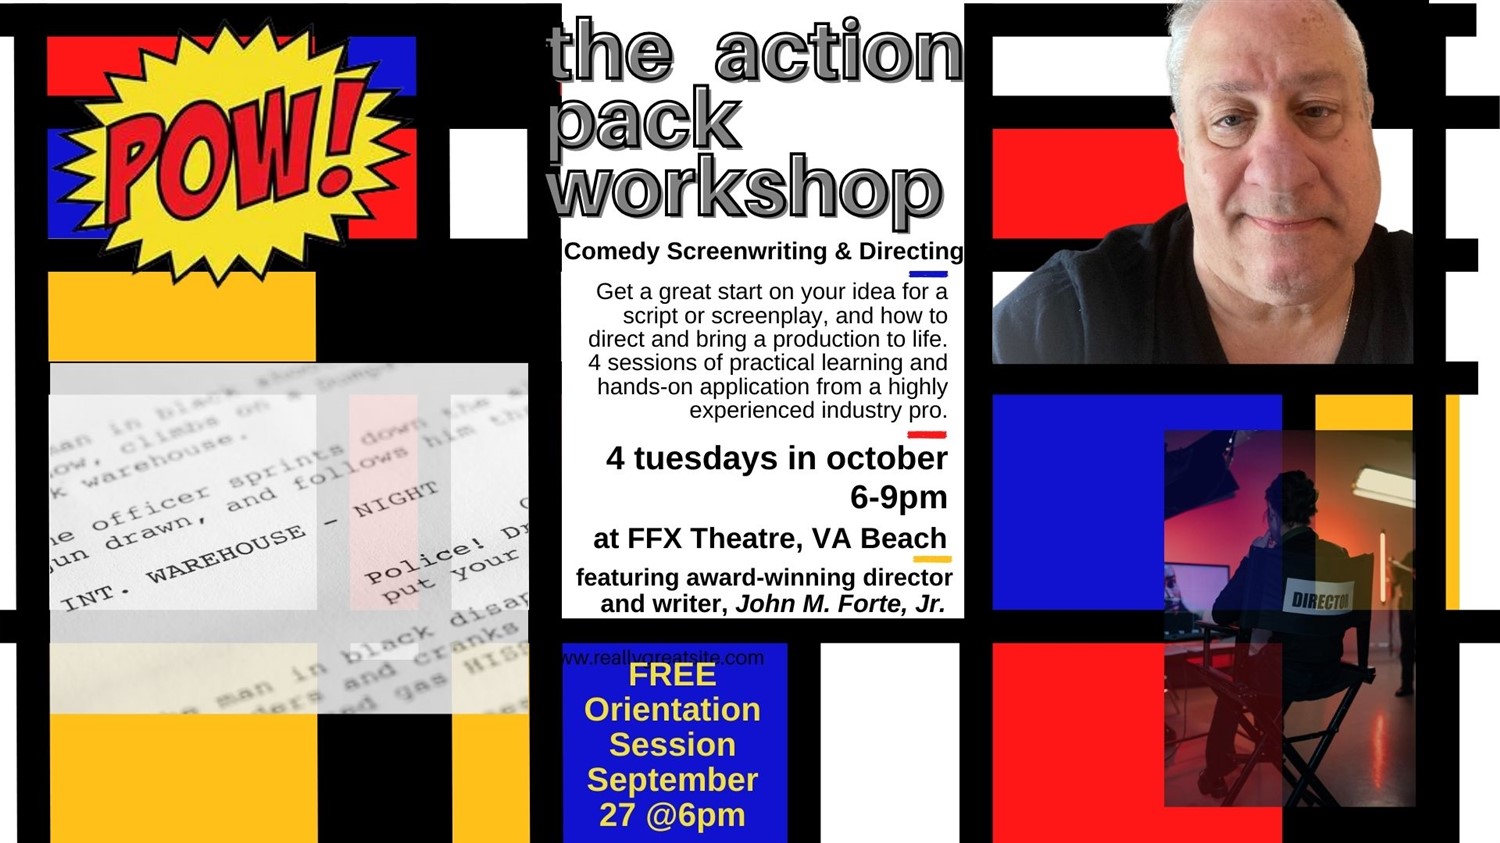 THE ACTION PACK: Session 3 of 4 - Comedy Screenwriting & Directing Workshop FEATURING JOHN FORTE! on oct. 17, 18:00@FFX Theatre - Achetez des billets et obtenez des informations surFamily Fun Xperience tickets.ffxshow.org